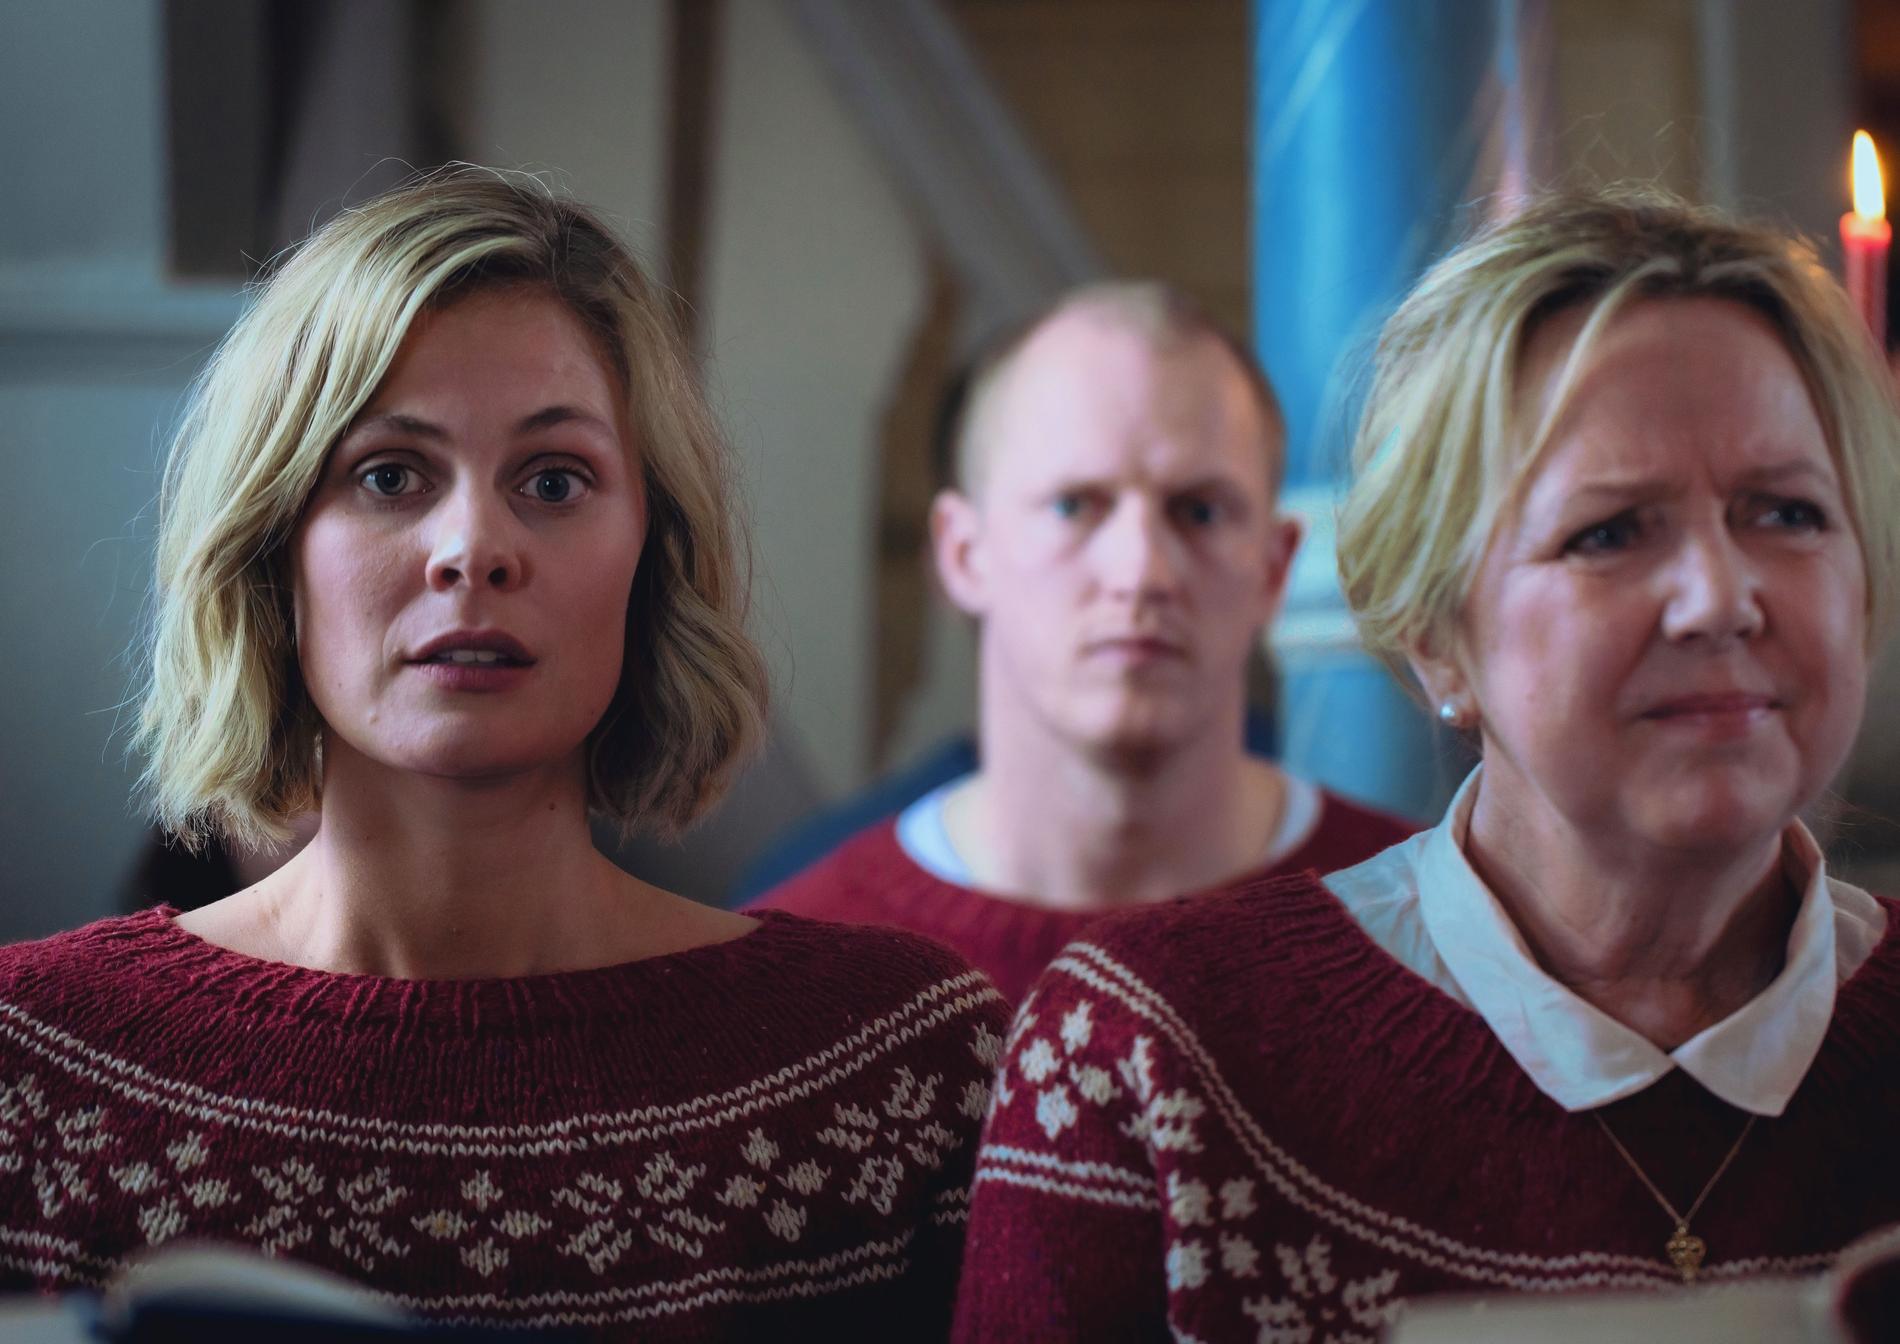 Roles: FV: Ida Ursin Holm (Thea) and Marit Andriessen (Mother Anne-Lise).  In the back sits Erik Volestad (Thea's brother Simen).